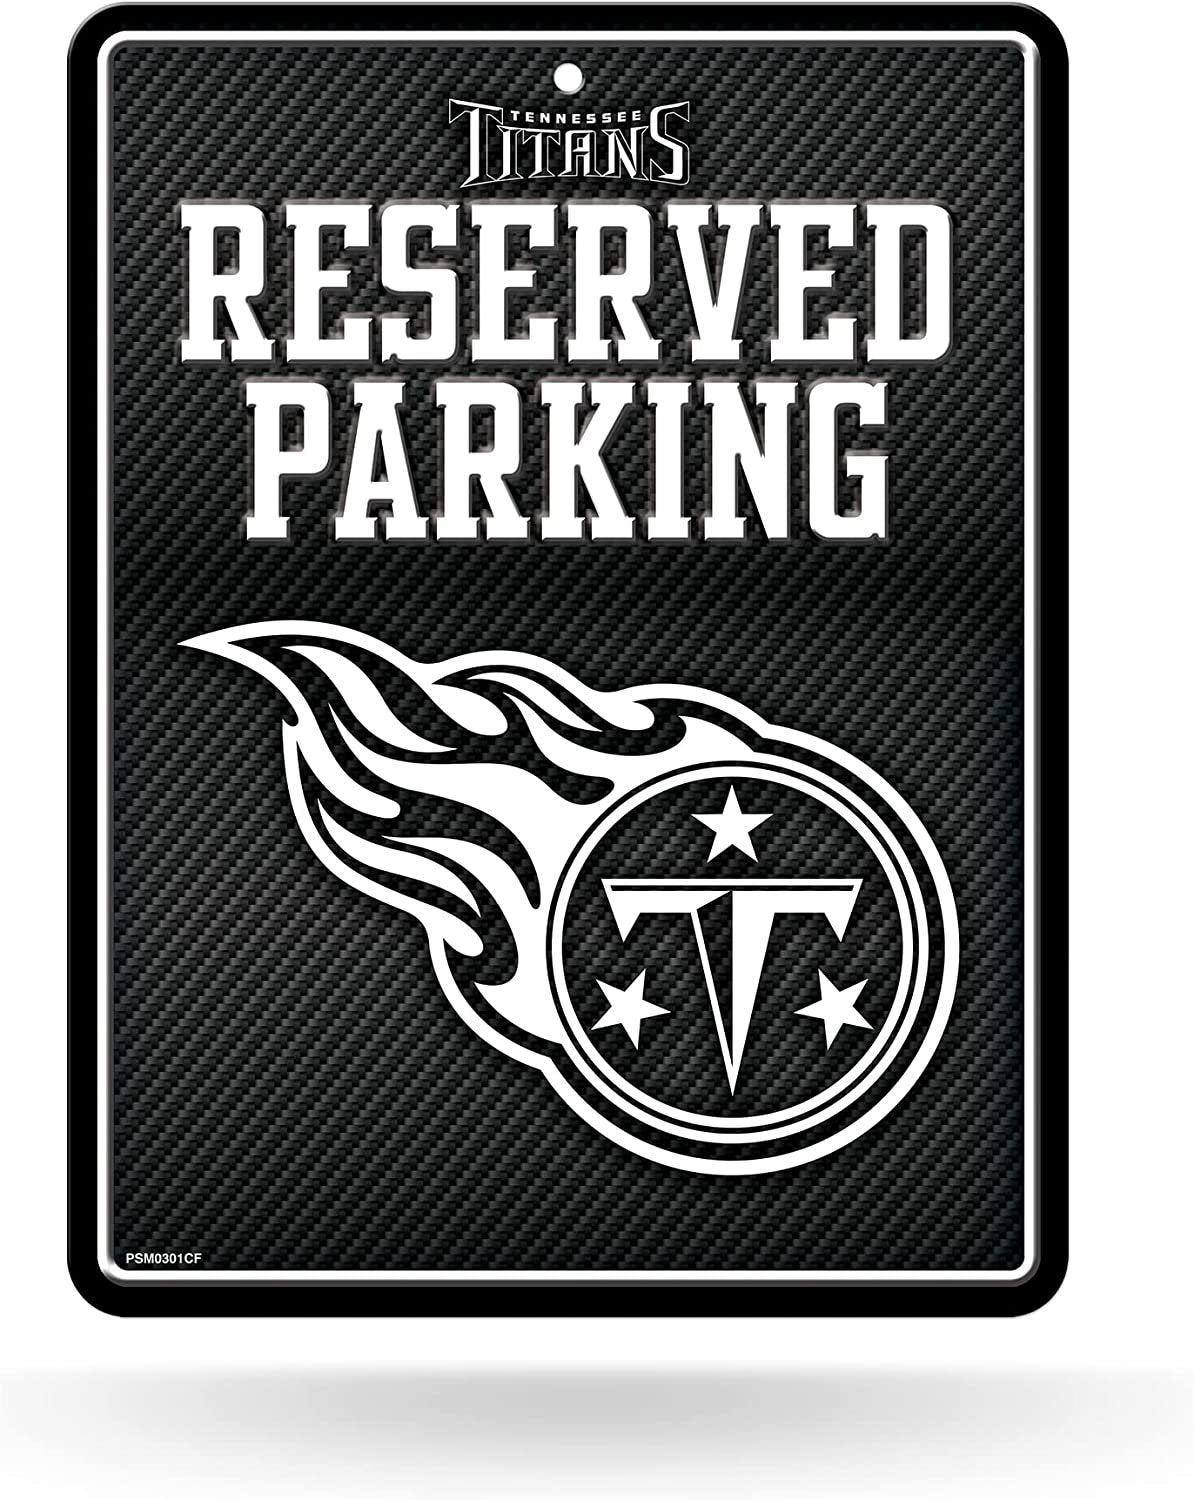 Tennessee Titans Metal Parking Novelty Wall Sign 8.5 x 11 Inch Carbon Fiber Design